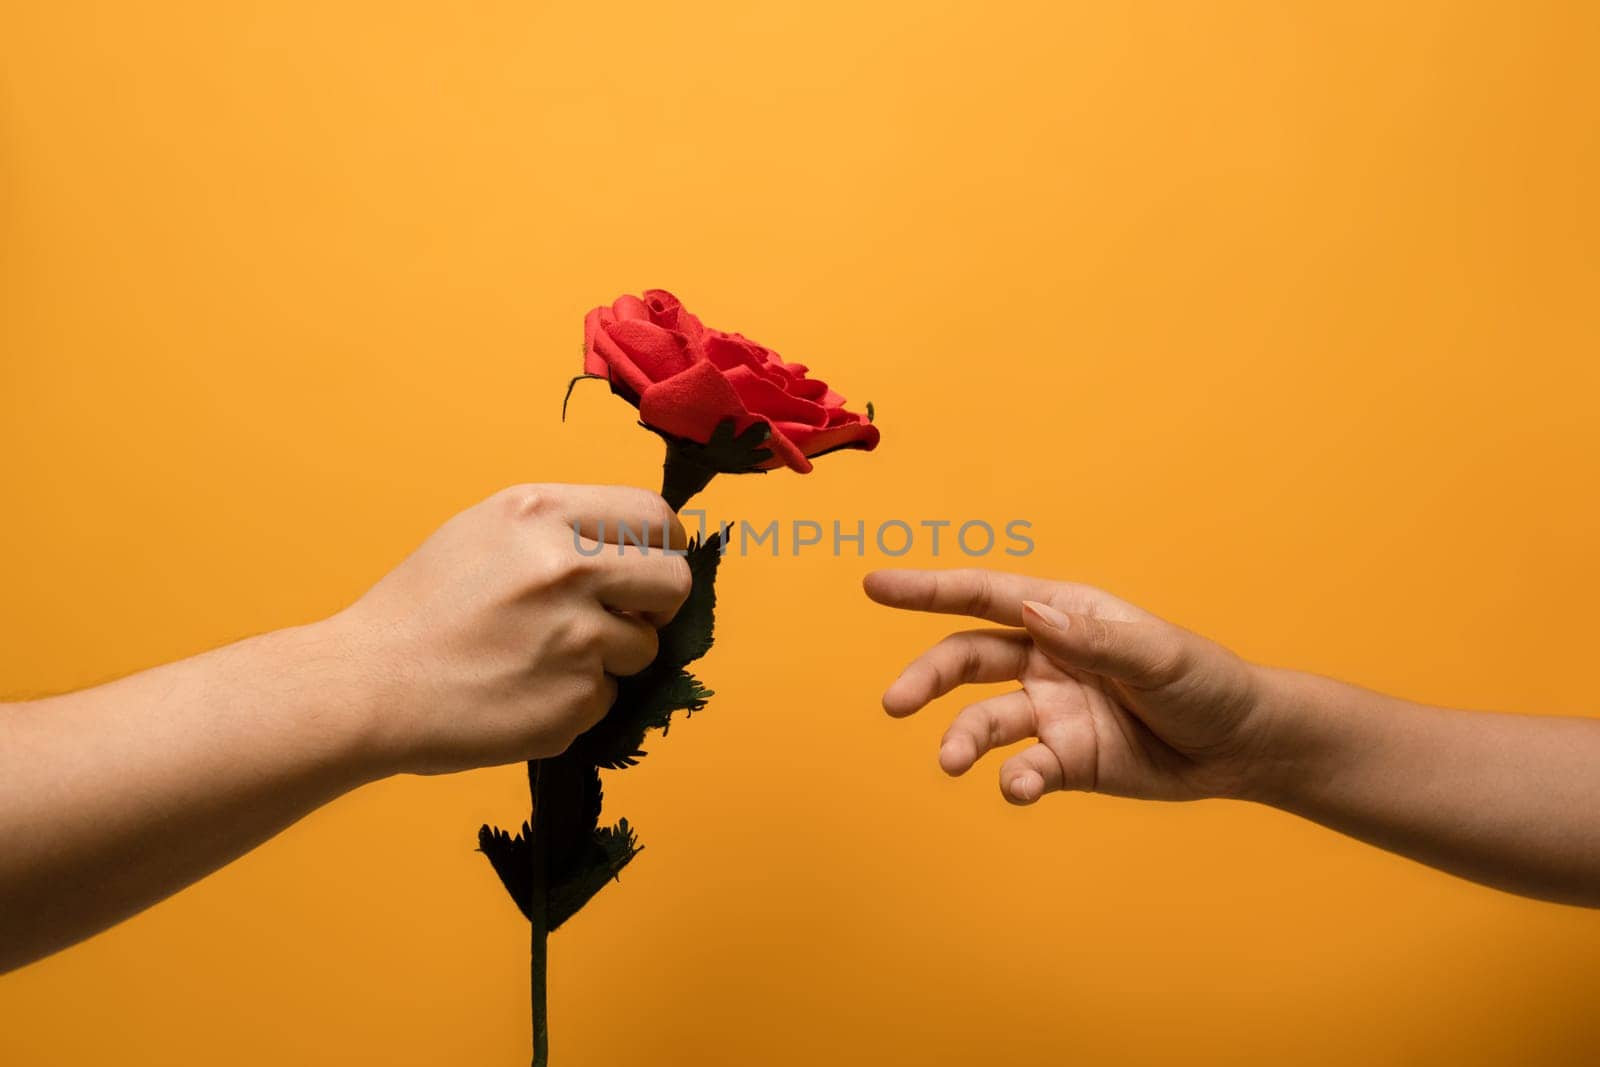 Man offering a beautiful rose to woman hand isolated over yellow background. Concept of love, gift giving, Happy Valentine's.